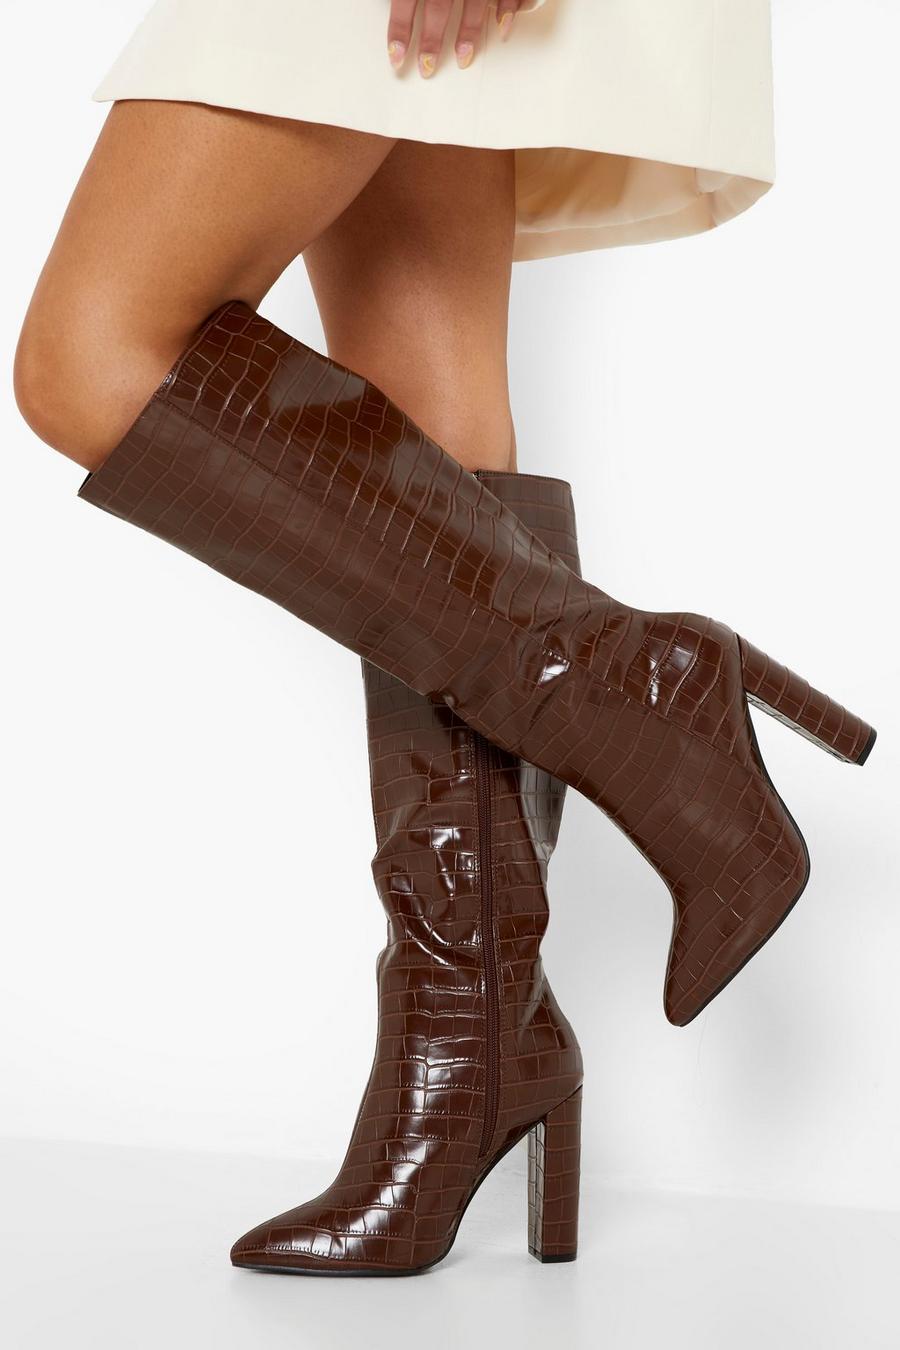 Bottes pointues pieds larges motif croco, Chocolate brown